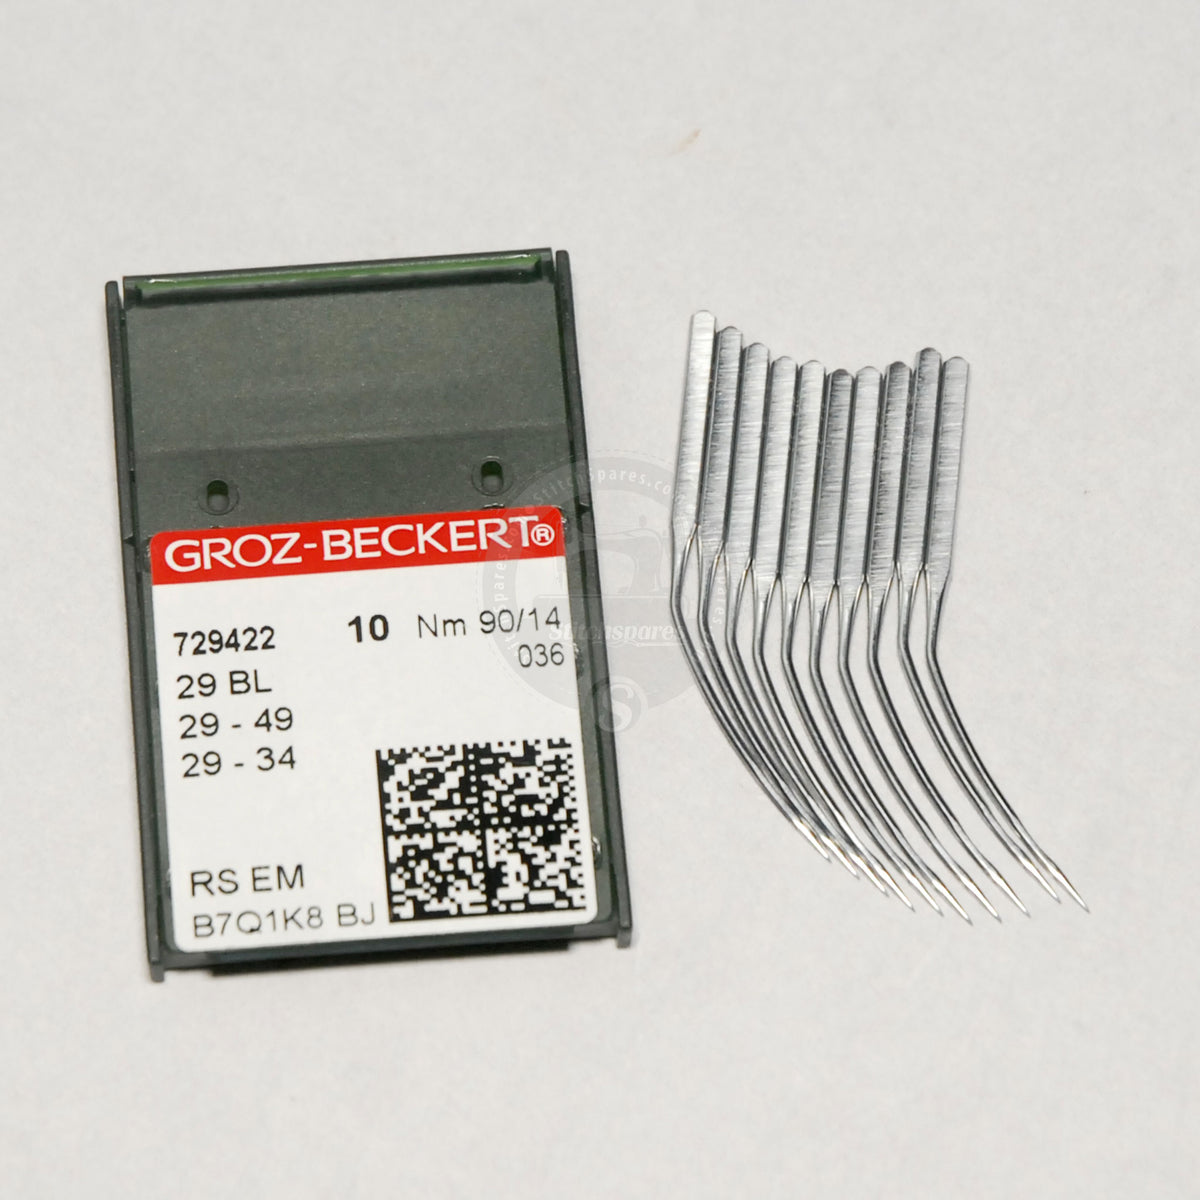 Groz-Beckert, Portable Blindstitch Curved Needles (100pk) : Sewing Parts  Online